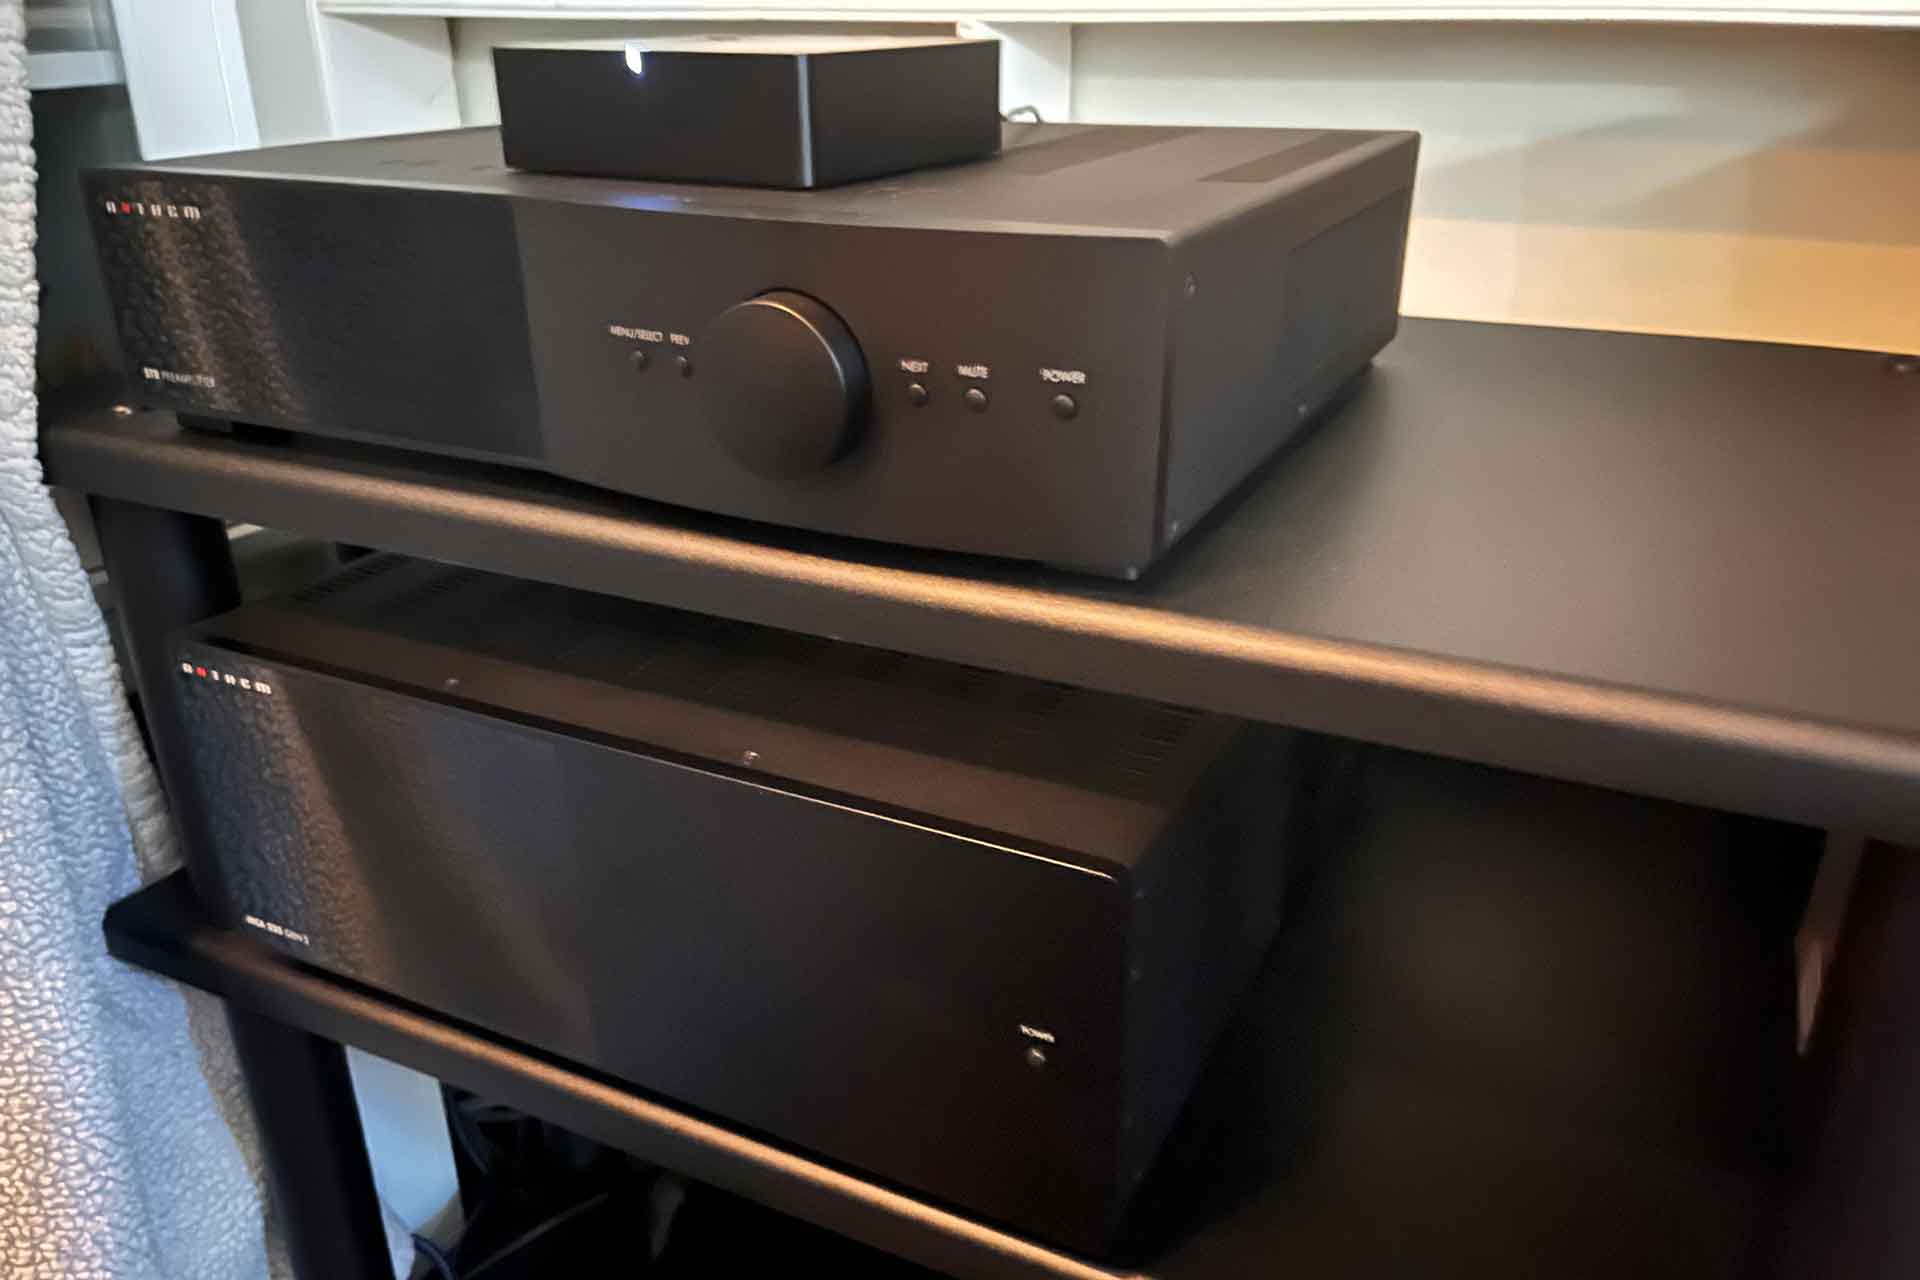 Andrew Dewhirst's Audiophile System